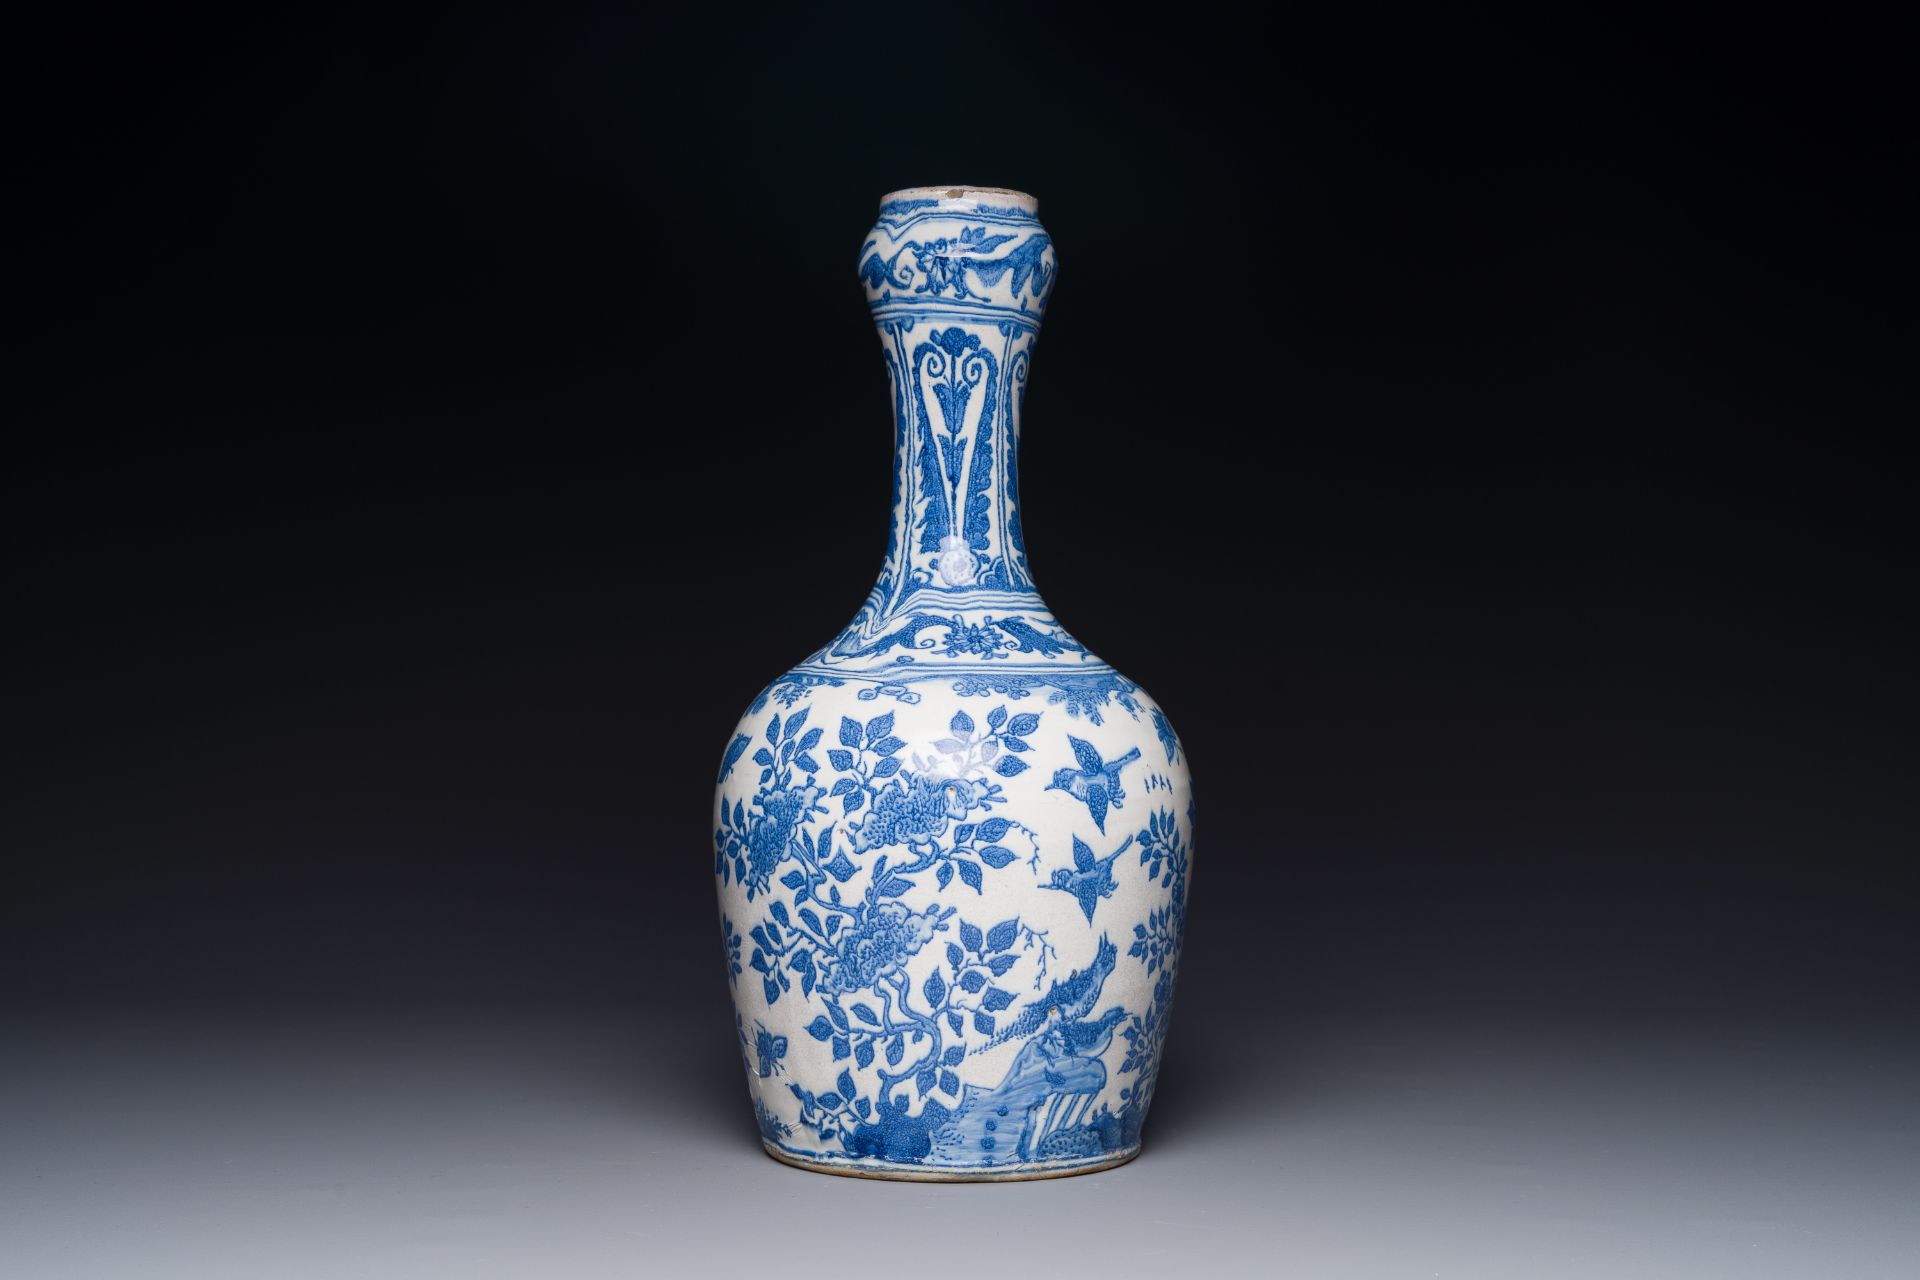 A Dutch blue and white chinoiserie bottle vase, Delft or Haarlem, 1st half 17th C. - Image 3 of 7